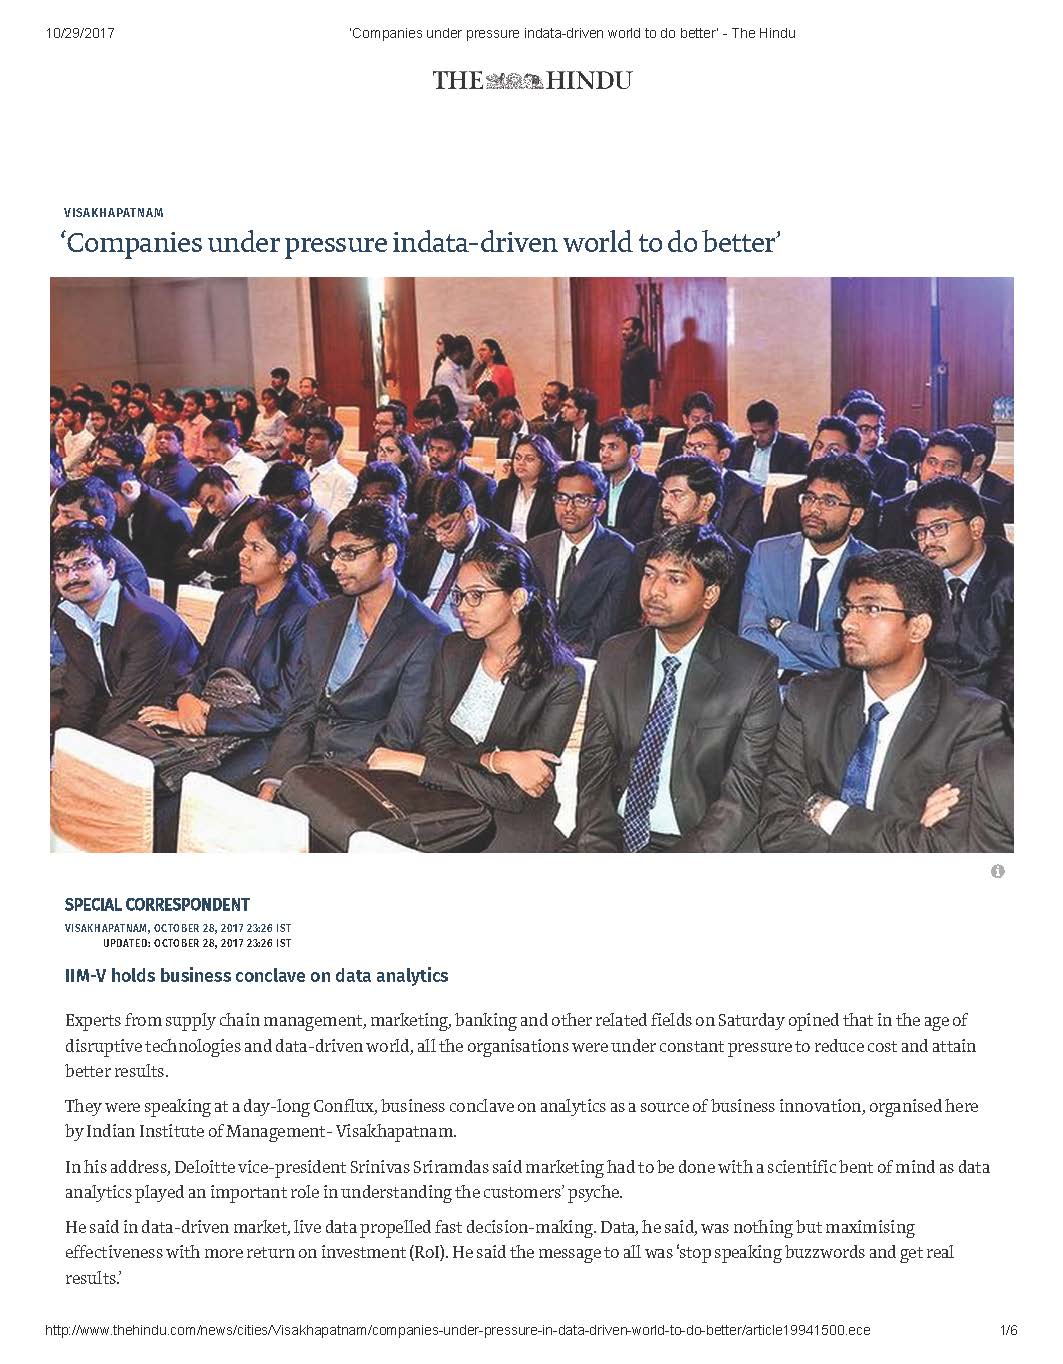 IIMV holds business conclave on data analytics - 29.10.2017